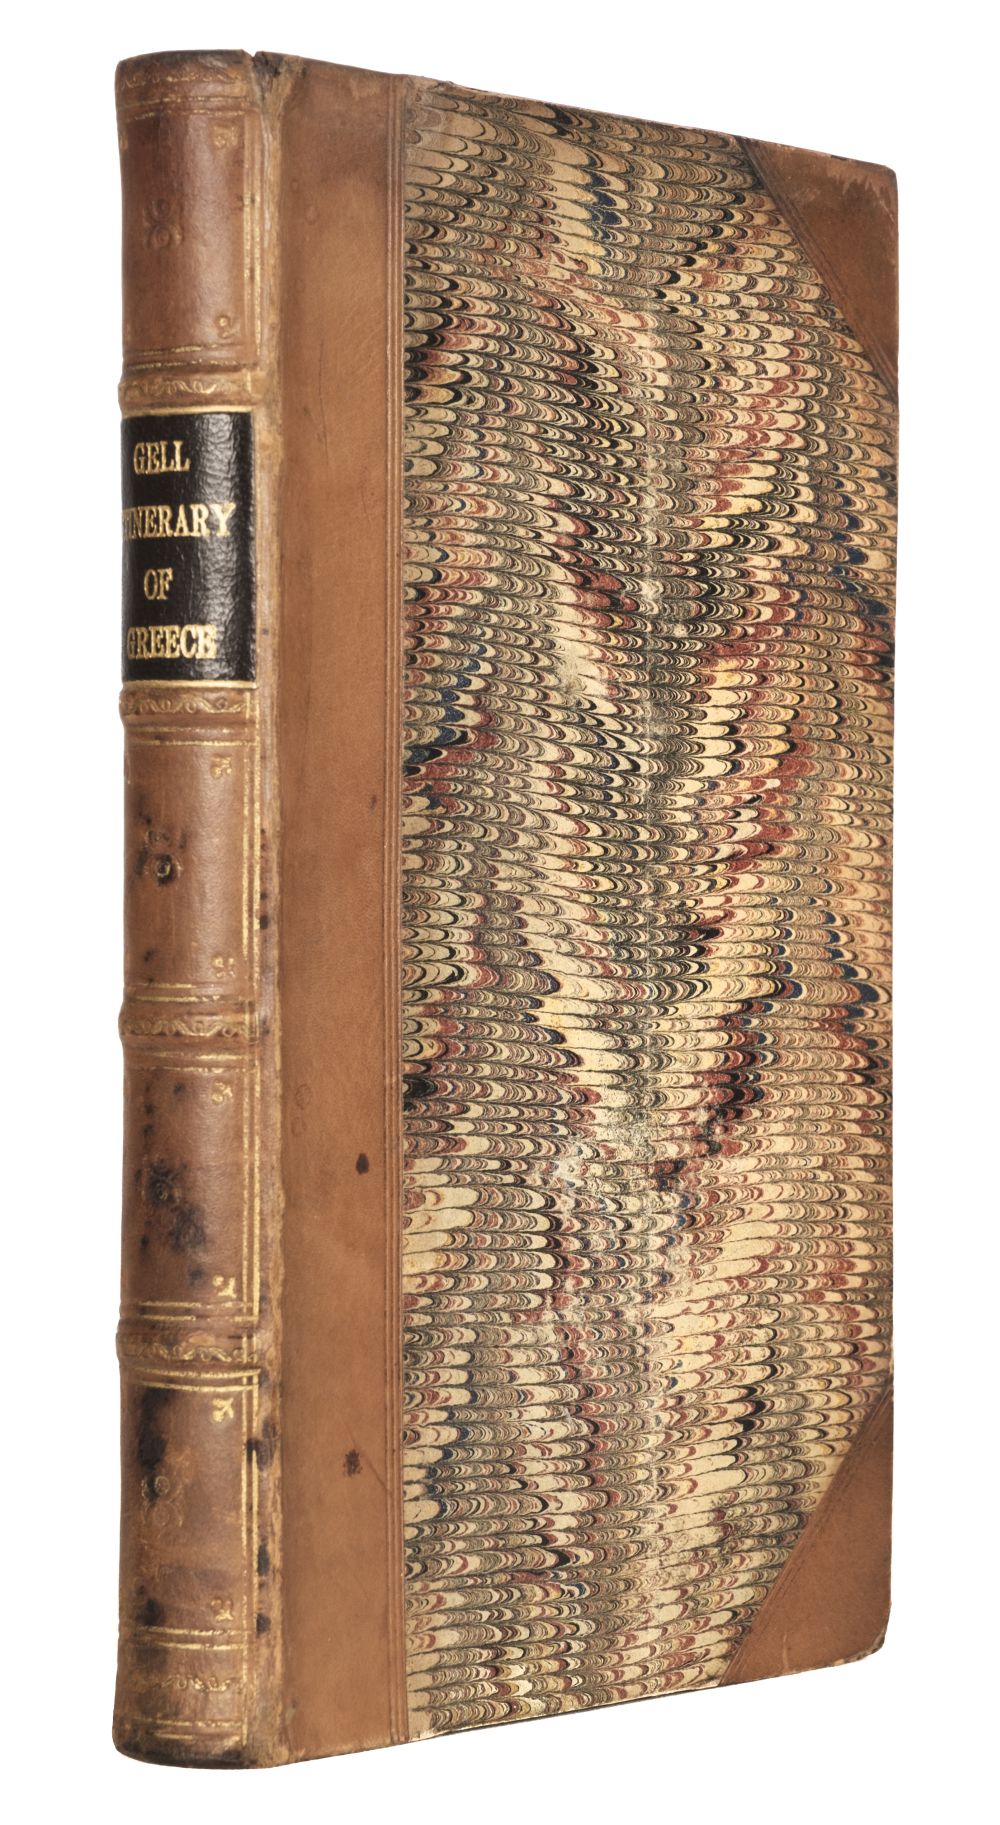 Gell (Sir William). The Itinerary of Greece, 1st edition, 1819